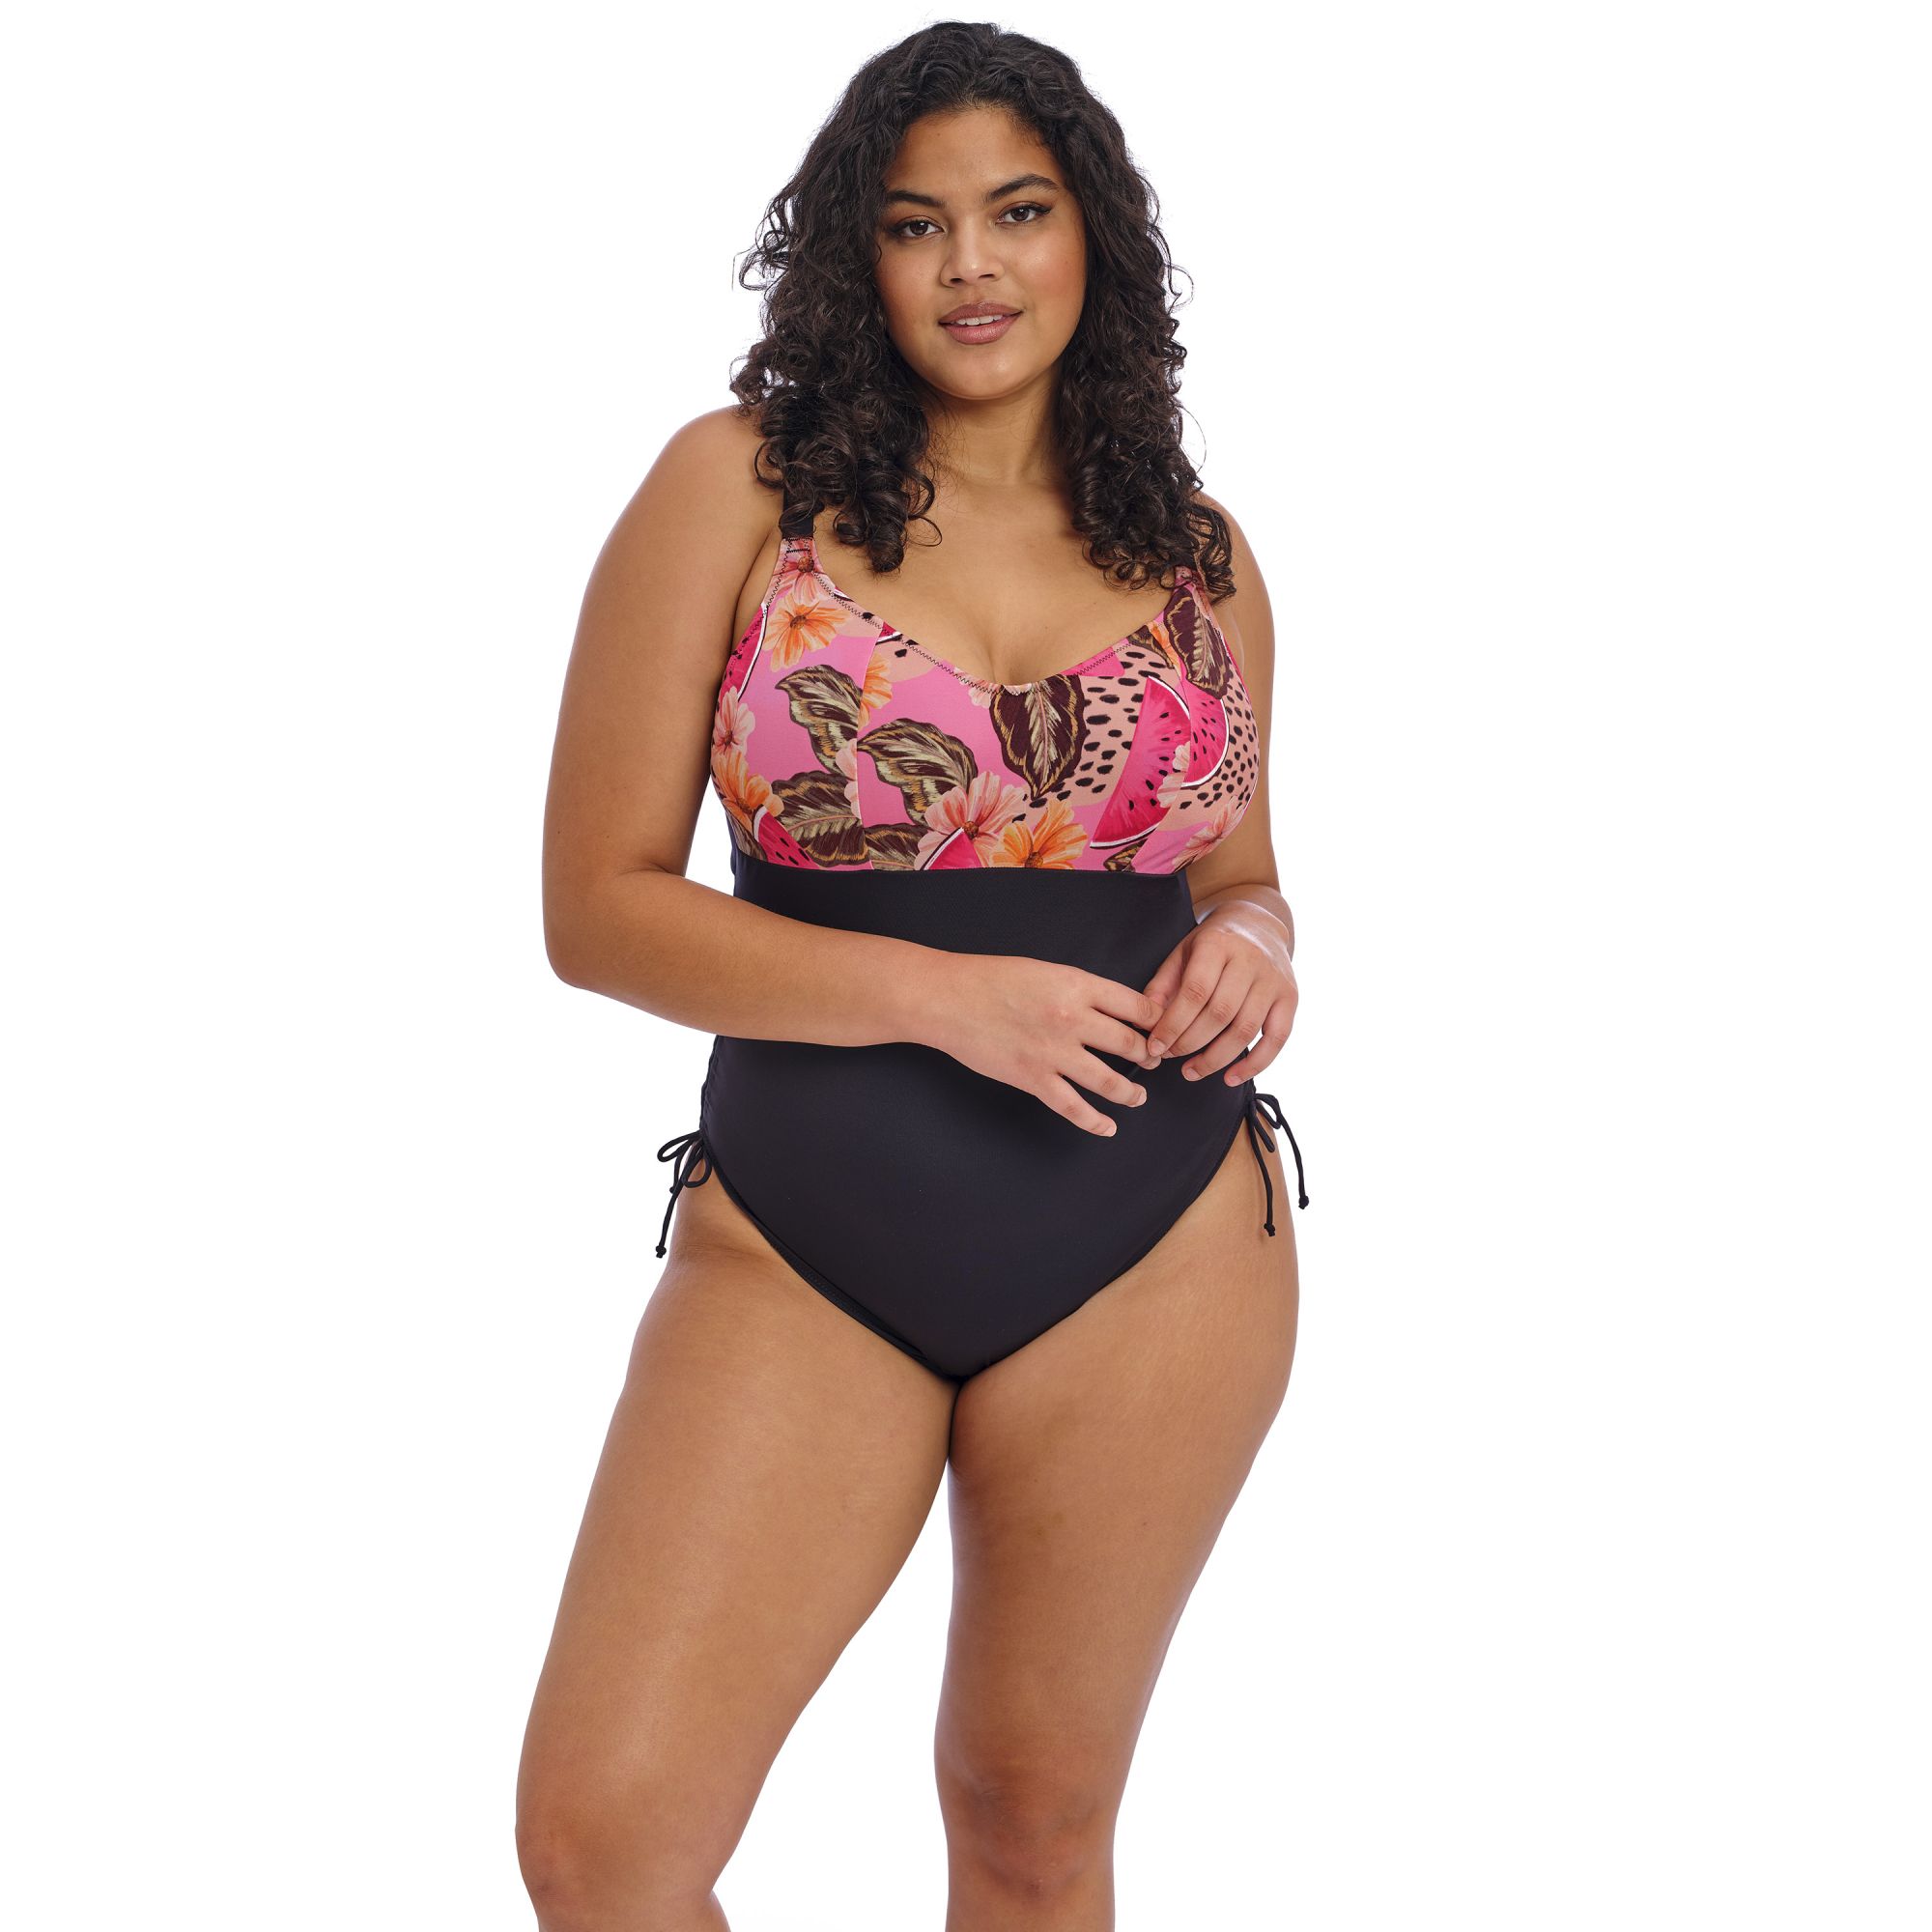 CABANA-NIGHTS-MULTI-NON-WIRED-SWIMSUIT-ES801643-F-TRADE-3000-SS24